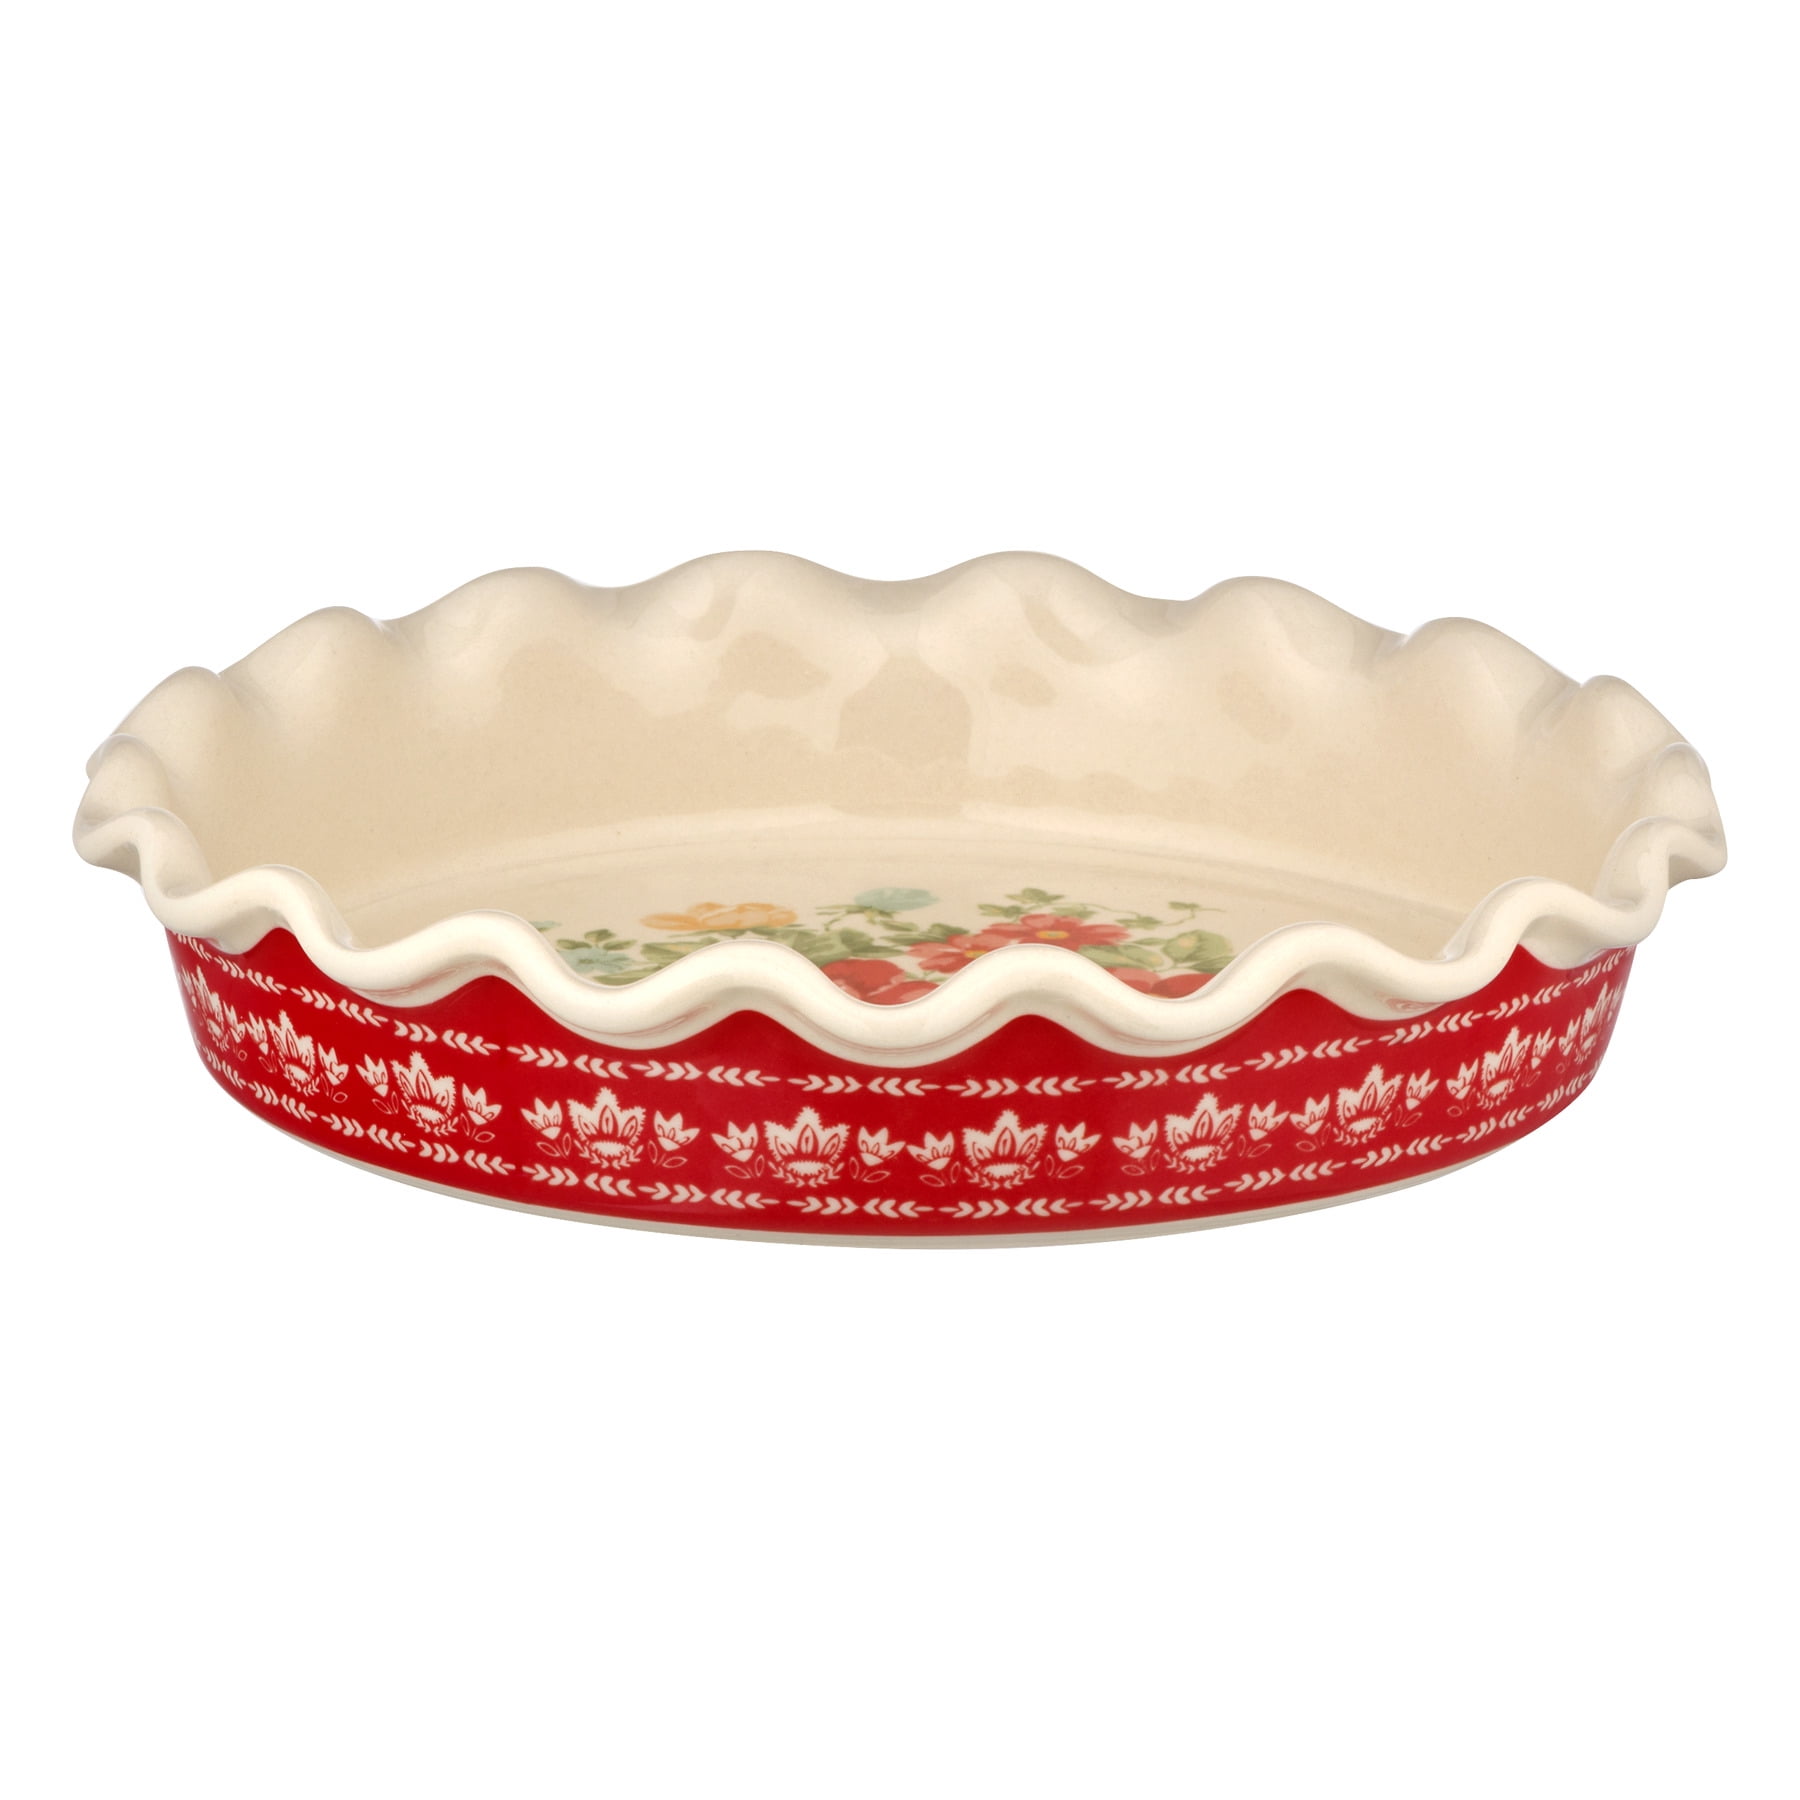  The Pioneer Woman Mazie Pie Dish-Stoneware 9.4 Inch Pie Pan For  Everyday and Holidays Baking: Home & Kitchen